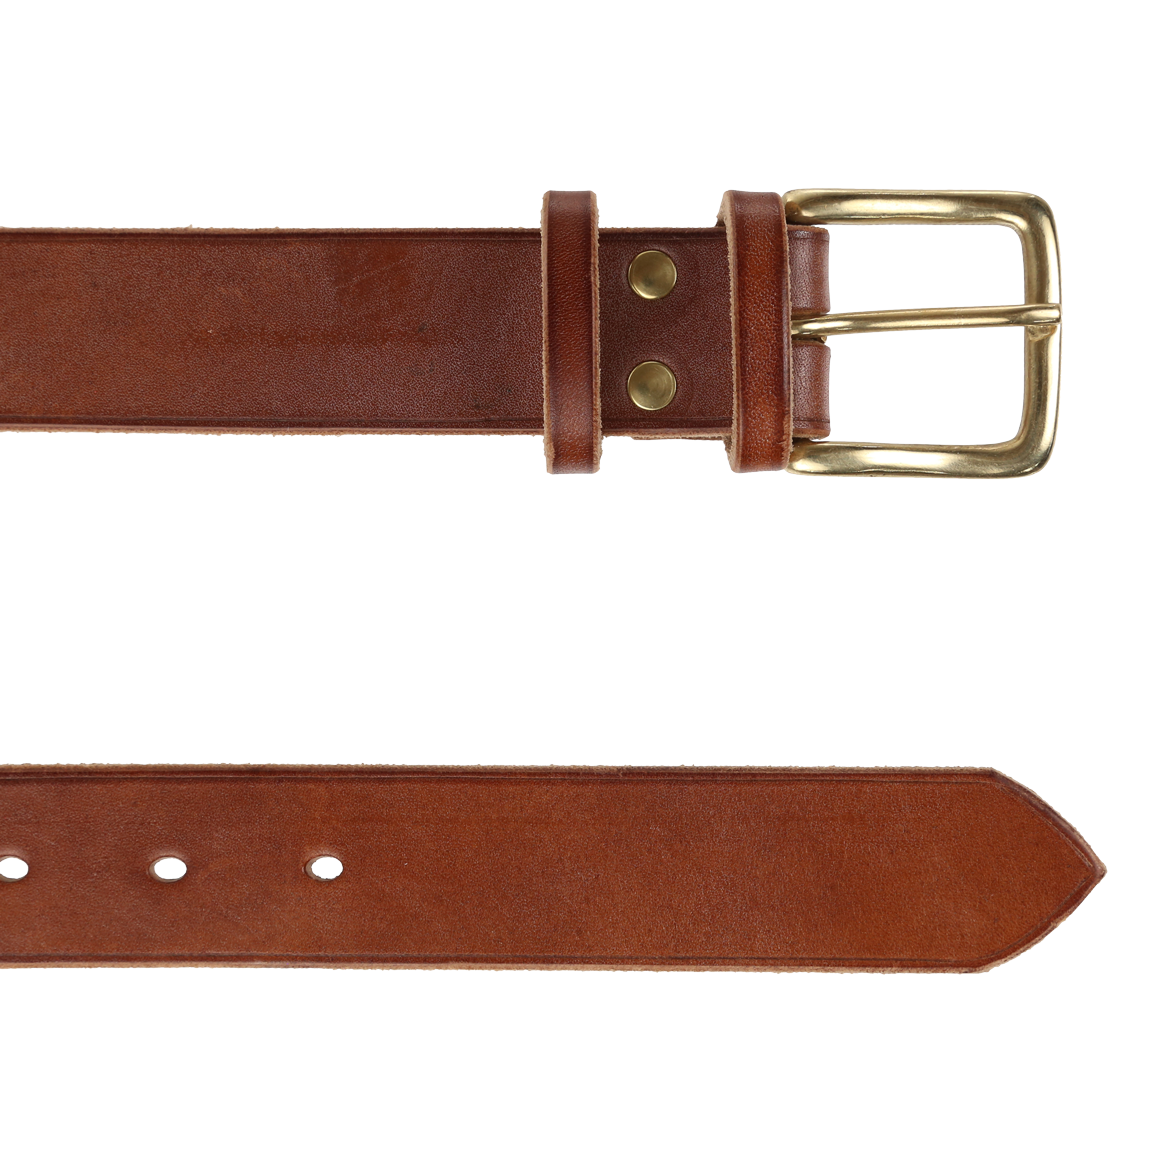 Solid brass buckle